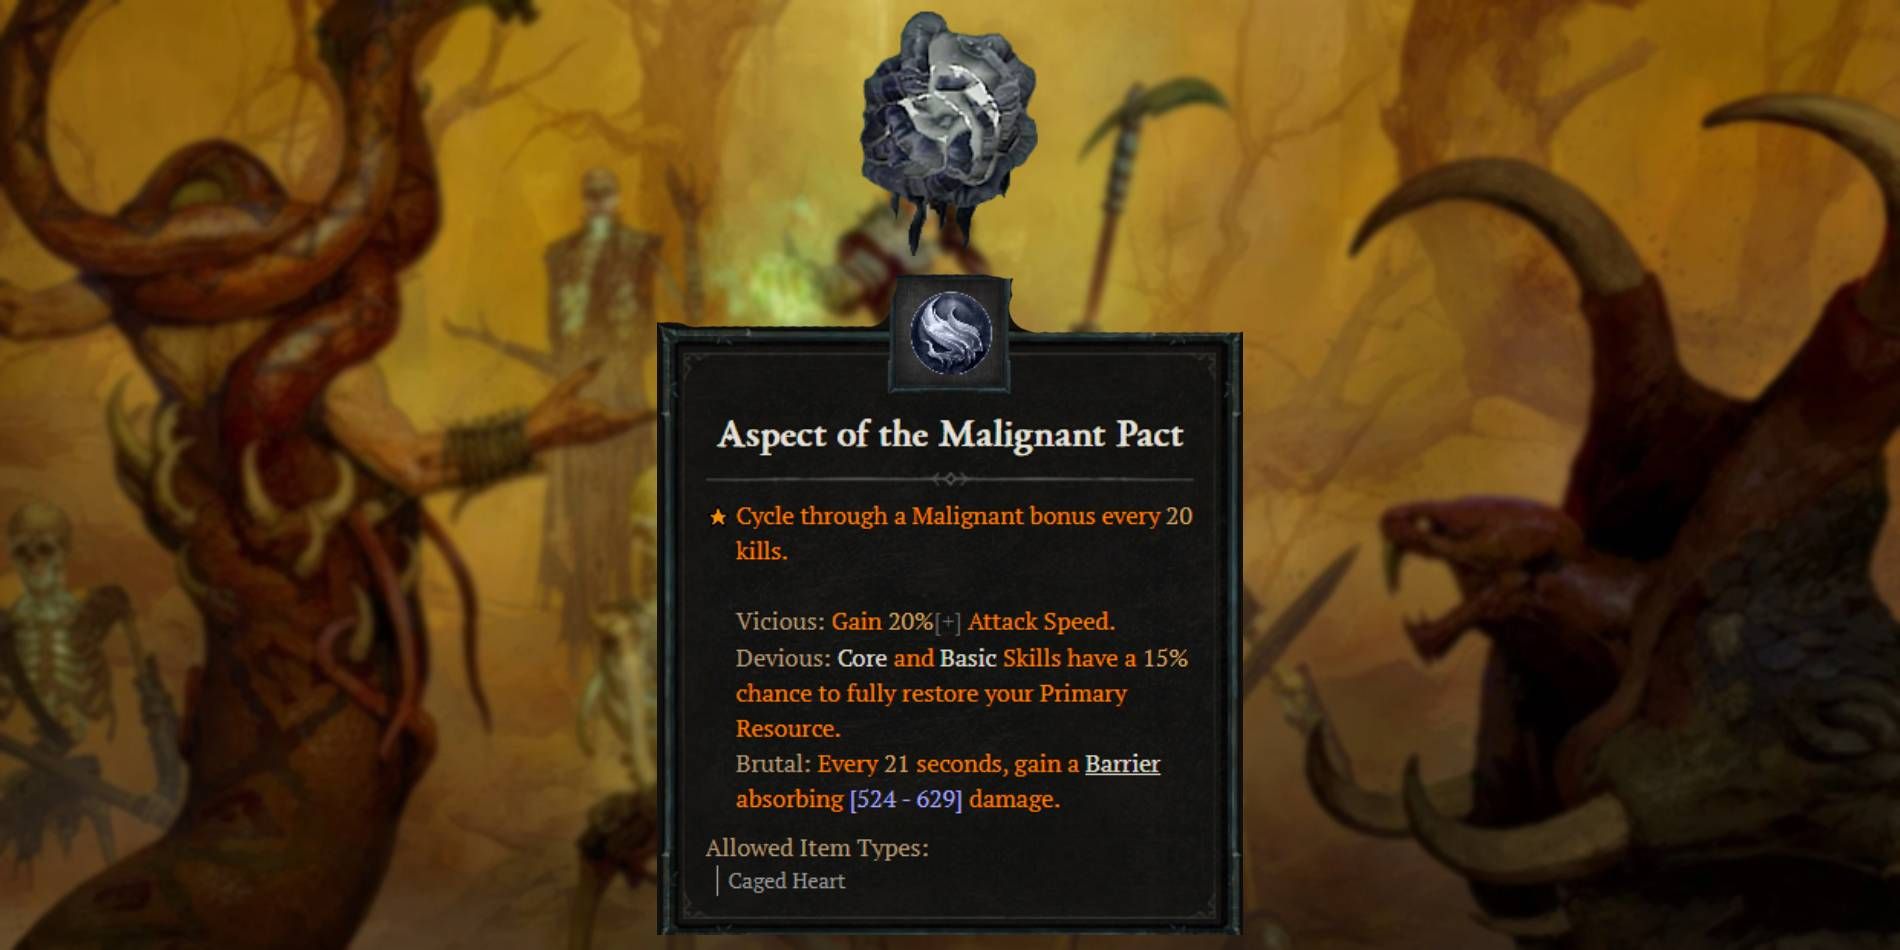 Diablo 4 Aspect of the Malignant Pact from Wrathful Malignant Heart Power